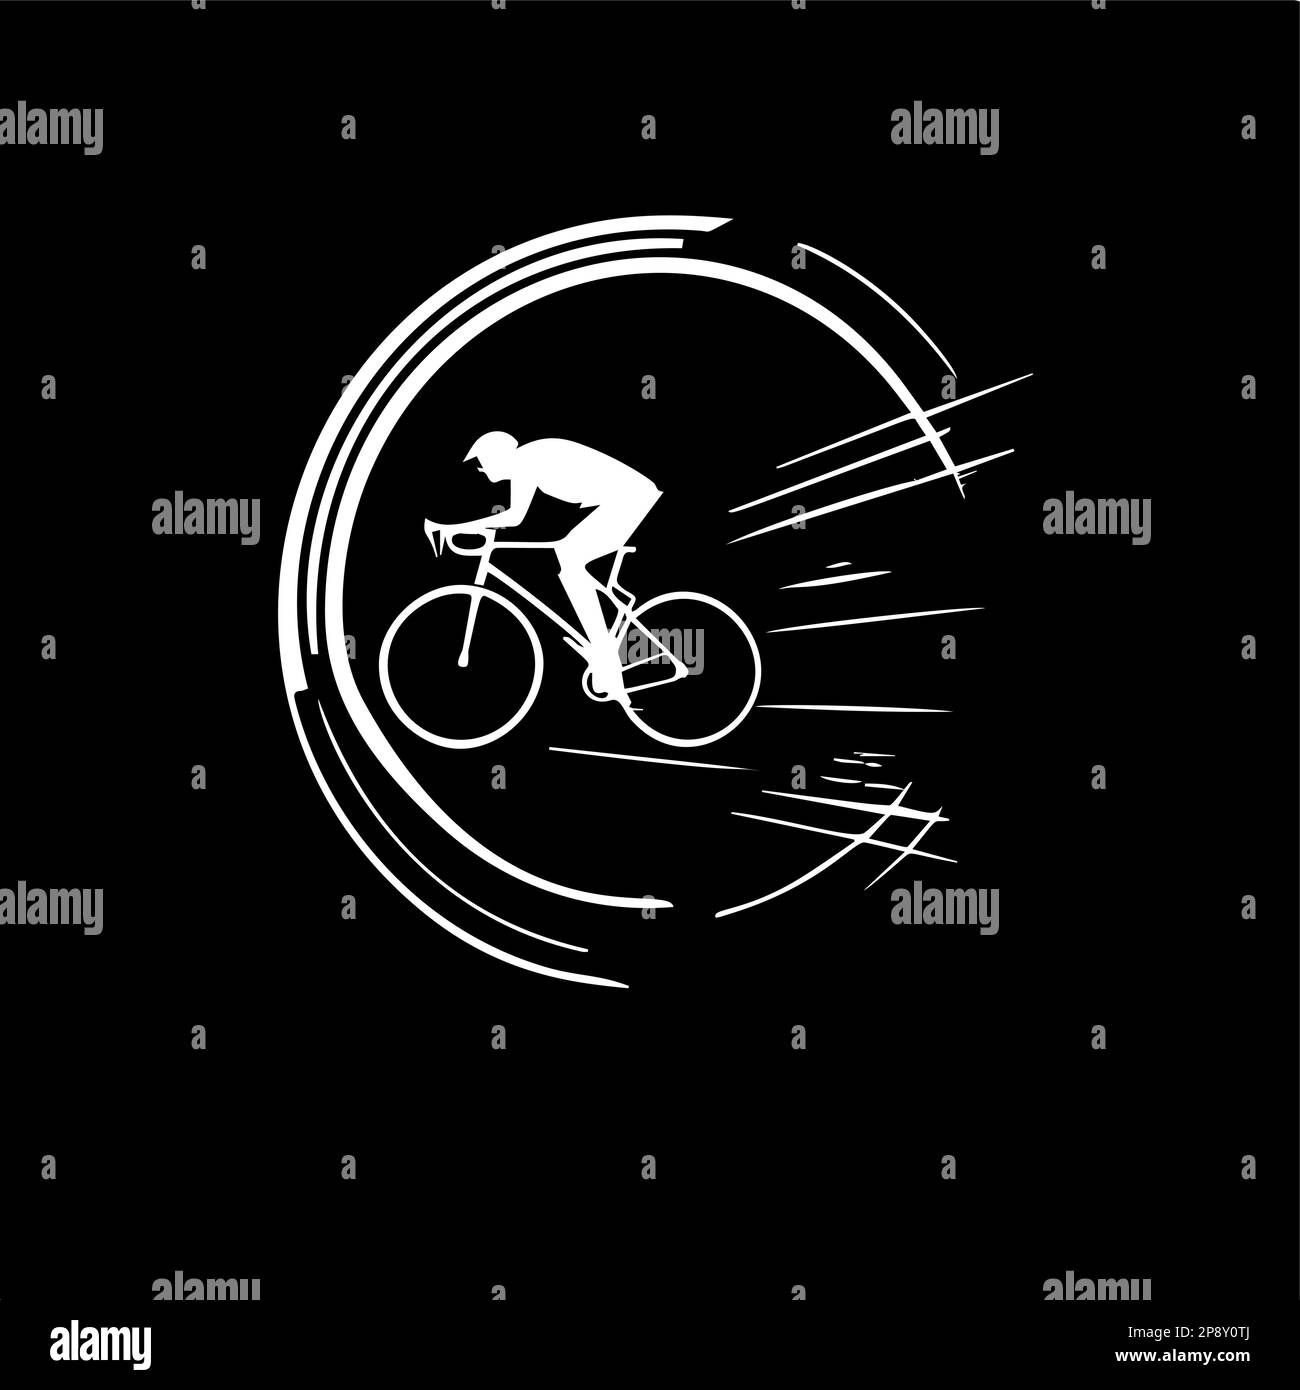 Minimalistic round logo template, white icon of cyclist silhouette on black background, modern logotype concept for business identity, t-shirts print Stock Vector